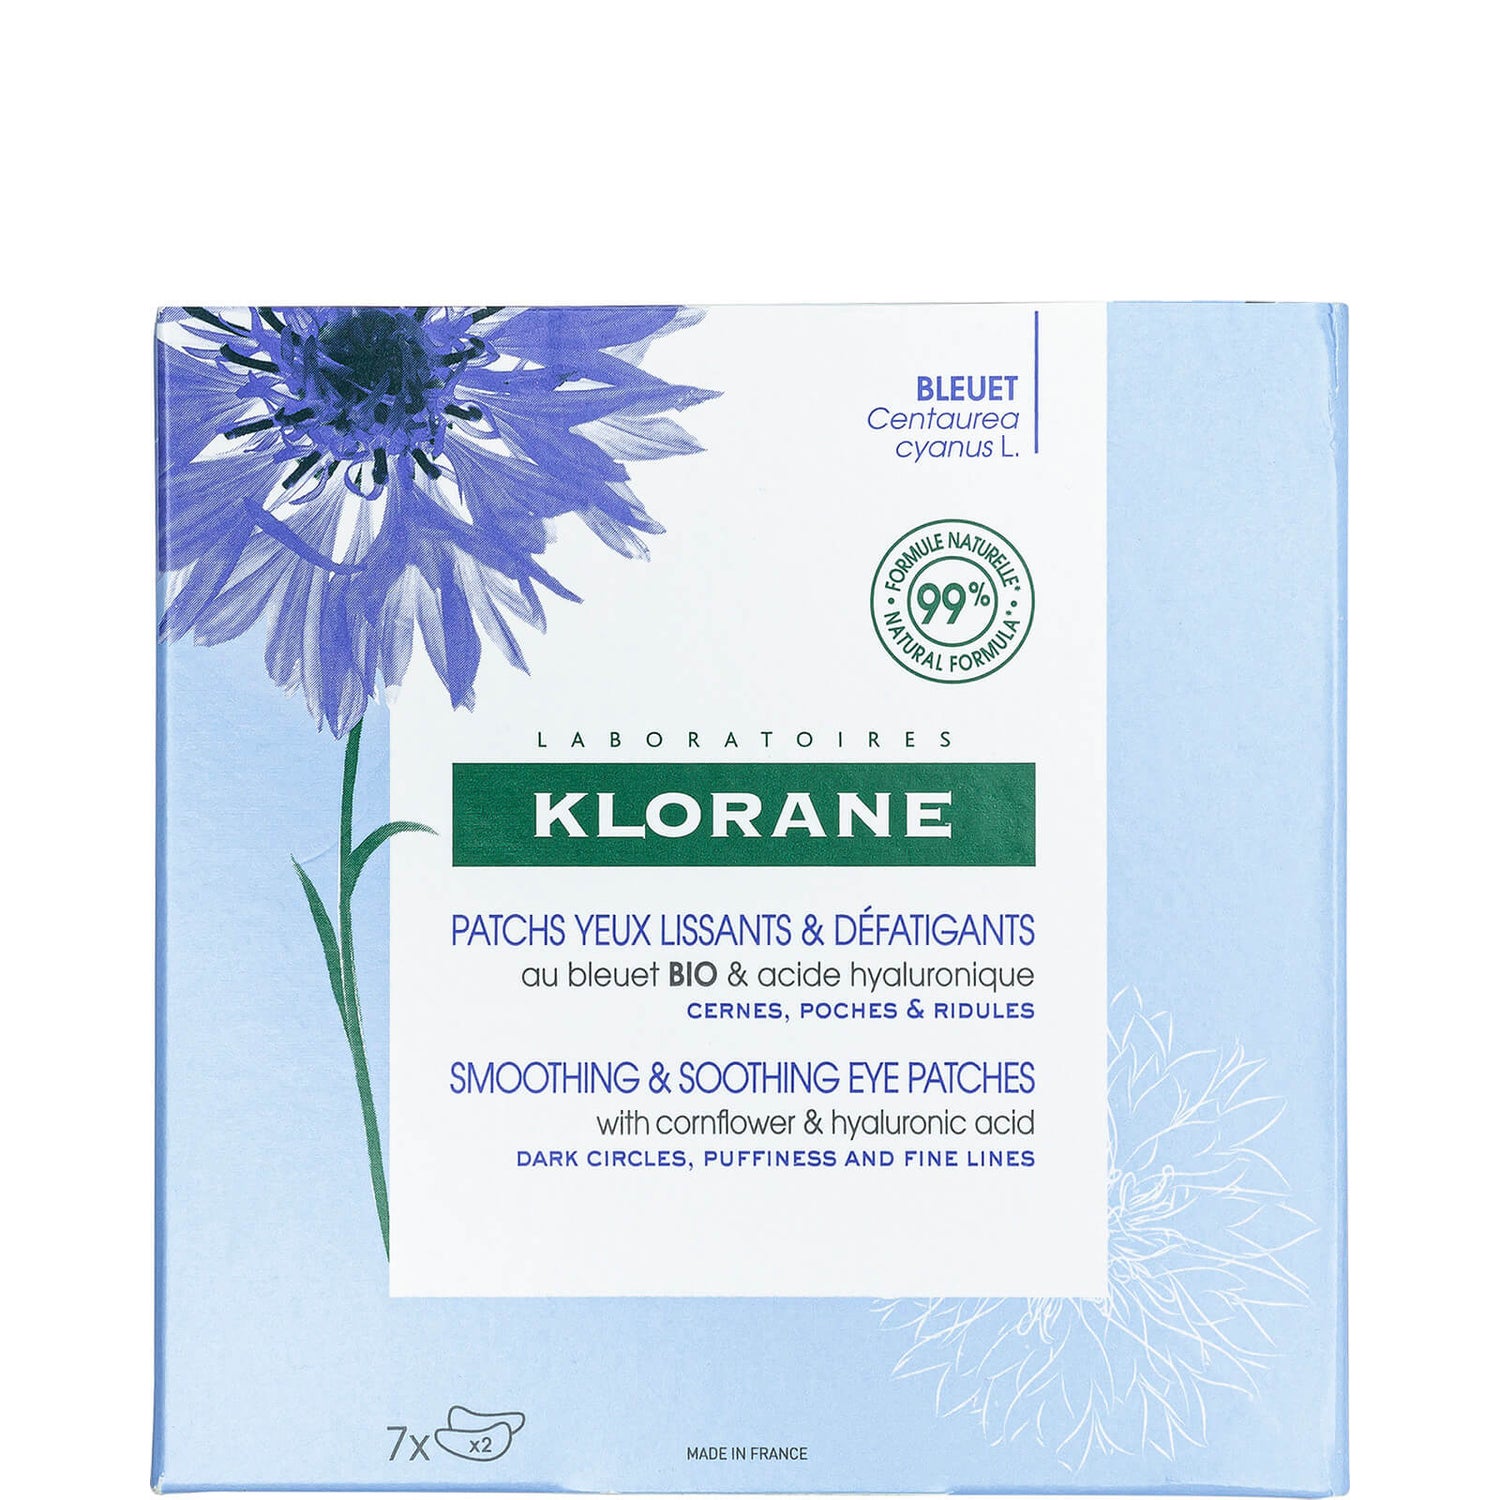 KLORANE Smoothing and Soothing Eye Patches with Cornflower and Hyaluronic Acid 7g